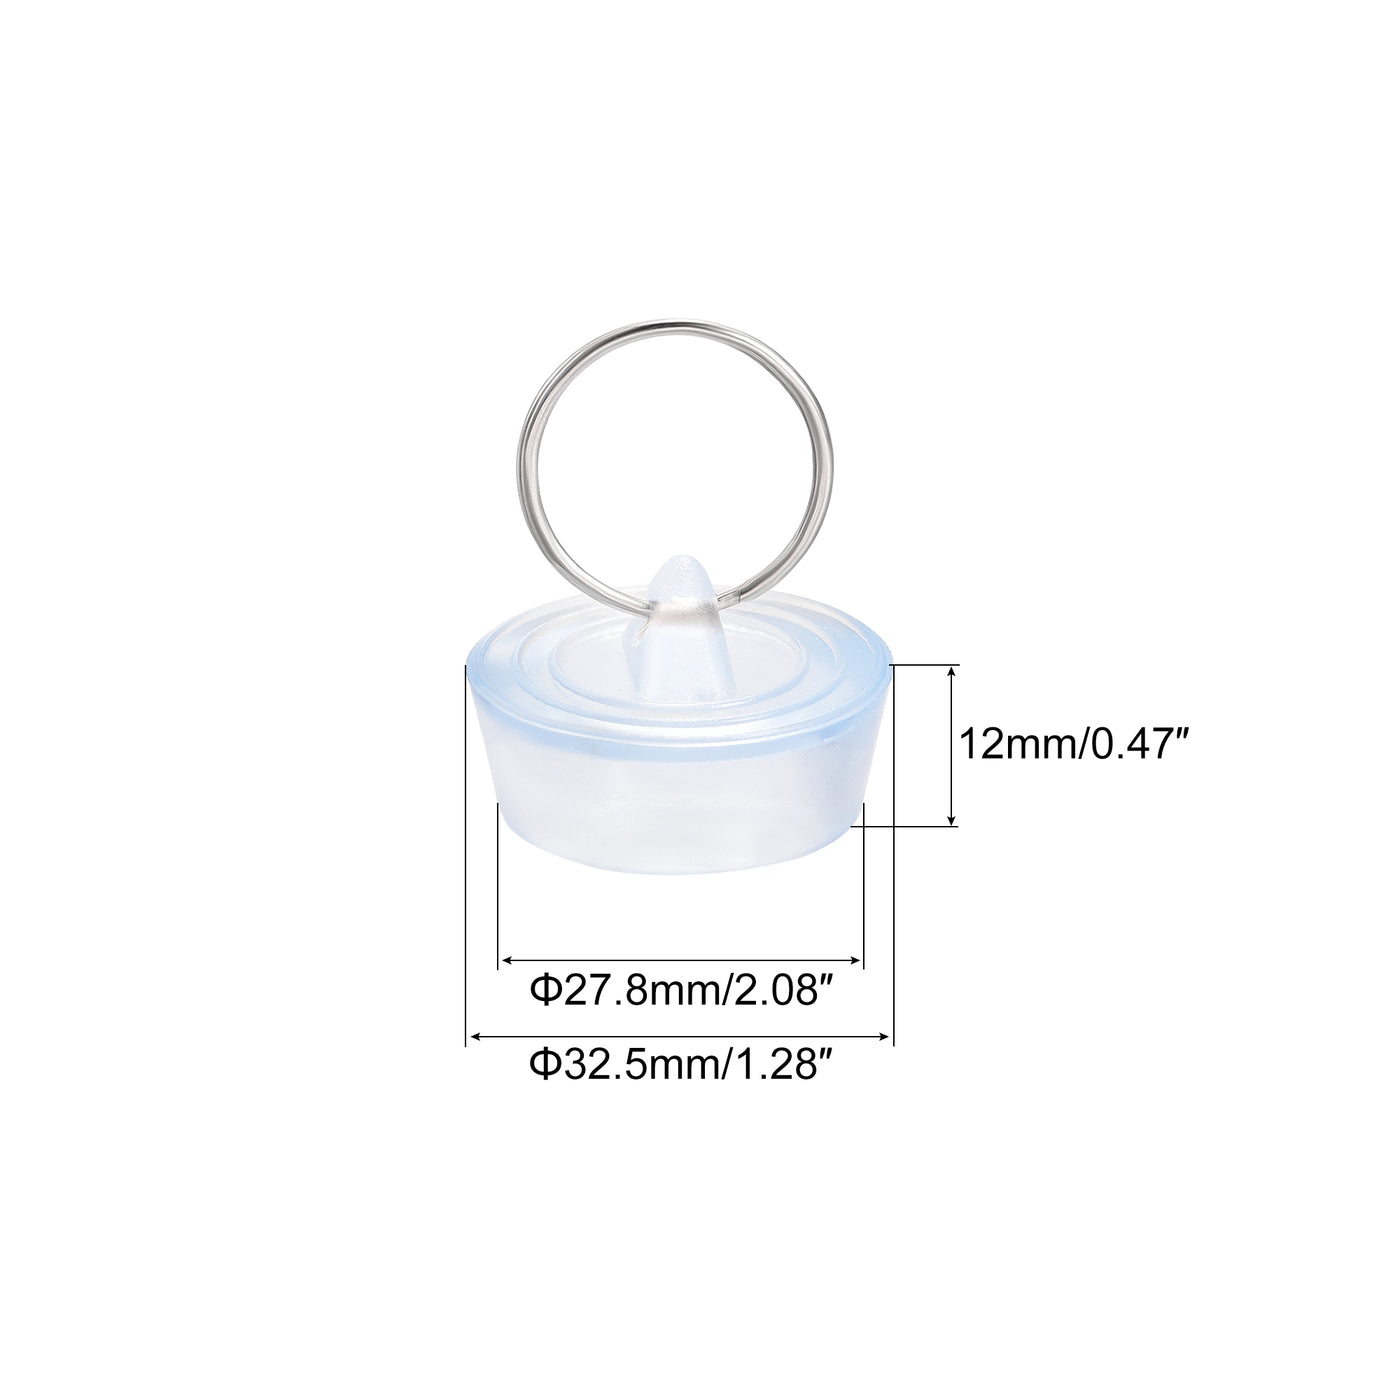 Uxcell Uxcell Rubber Sink Plug, Clear Drain Stopper Fit 2" to 2-1/16" Drain with Hanging Ring for Bathtub Kitchen and Bathroom